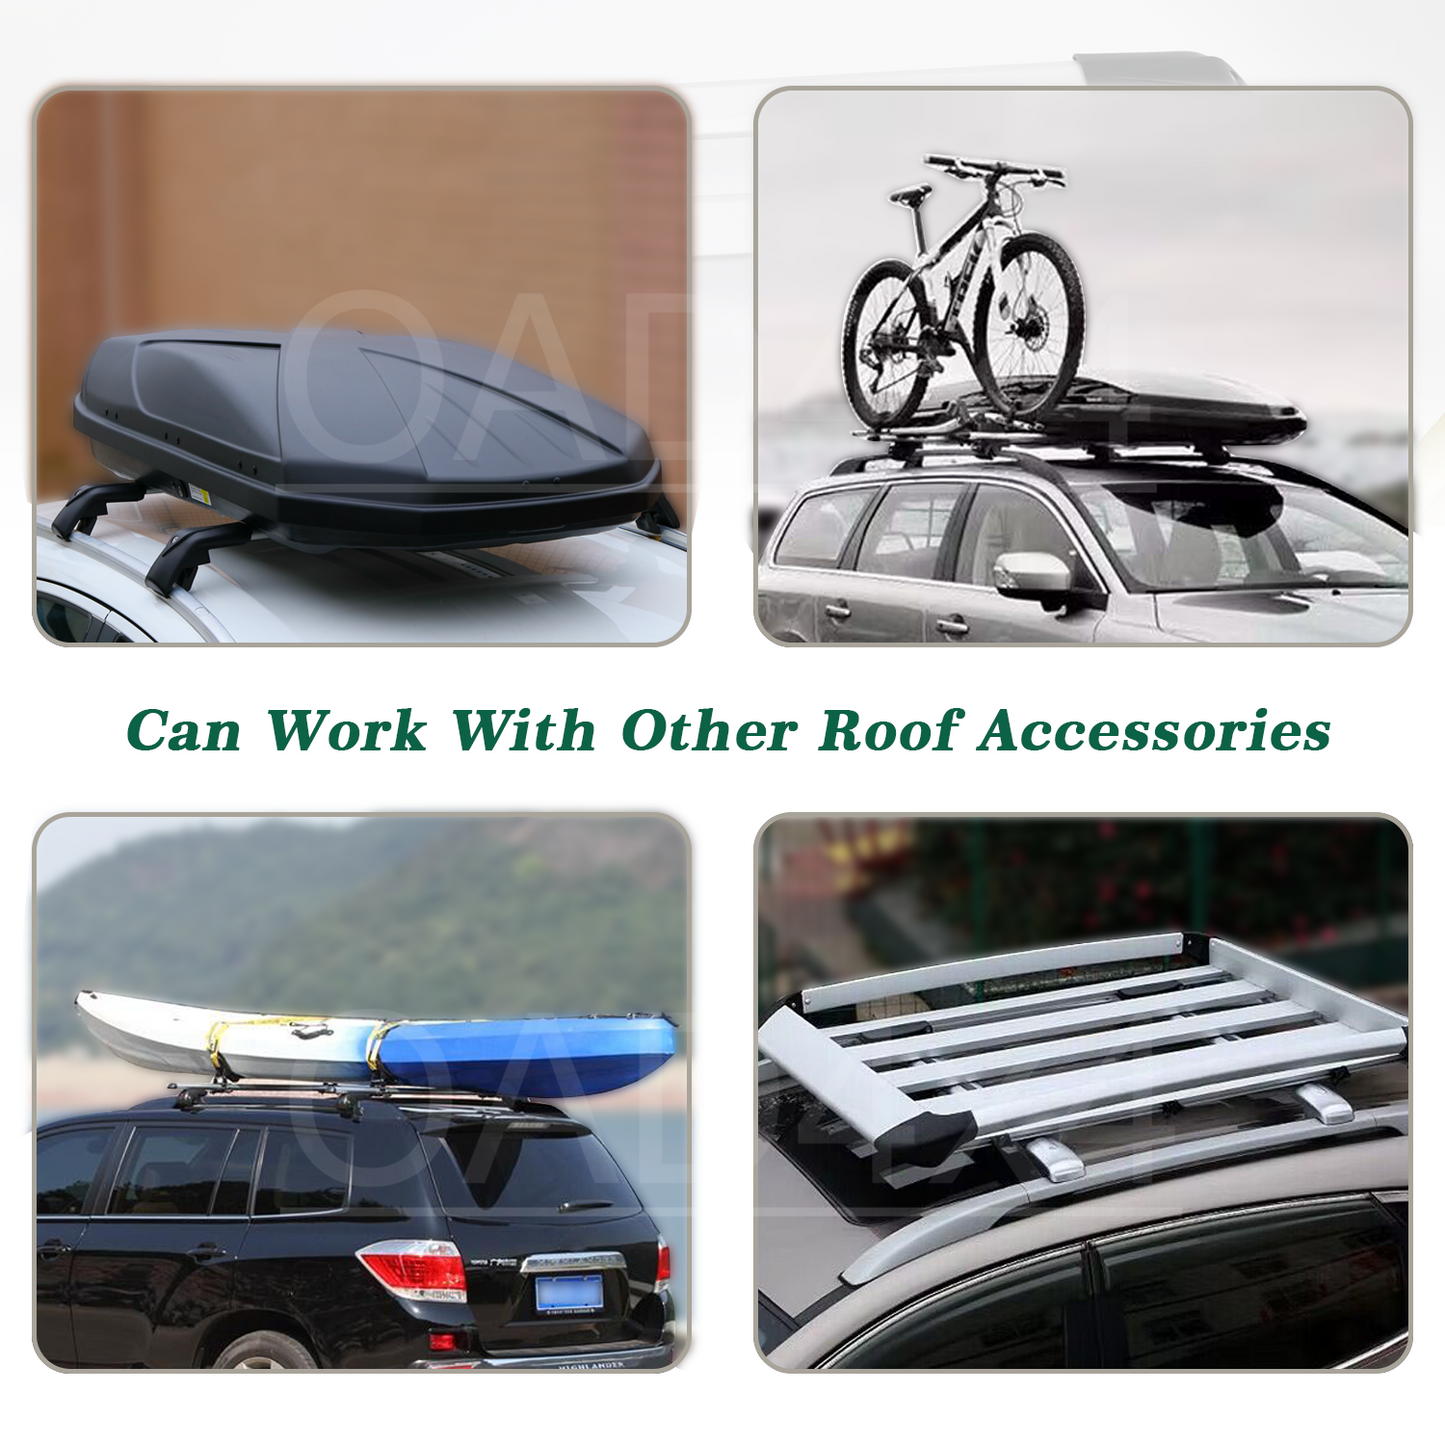 1 Pair Aluminum Silver Cross Bar Roof Racks Baggage holder for Audi A4 wagon with raised roof rail